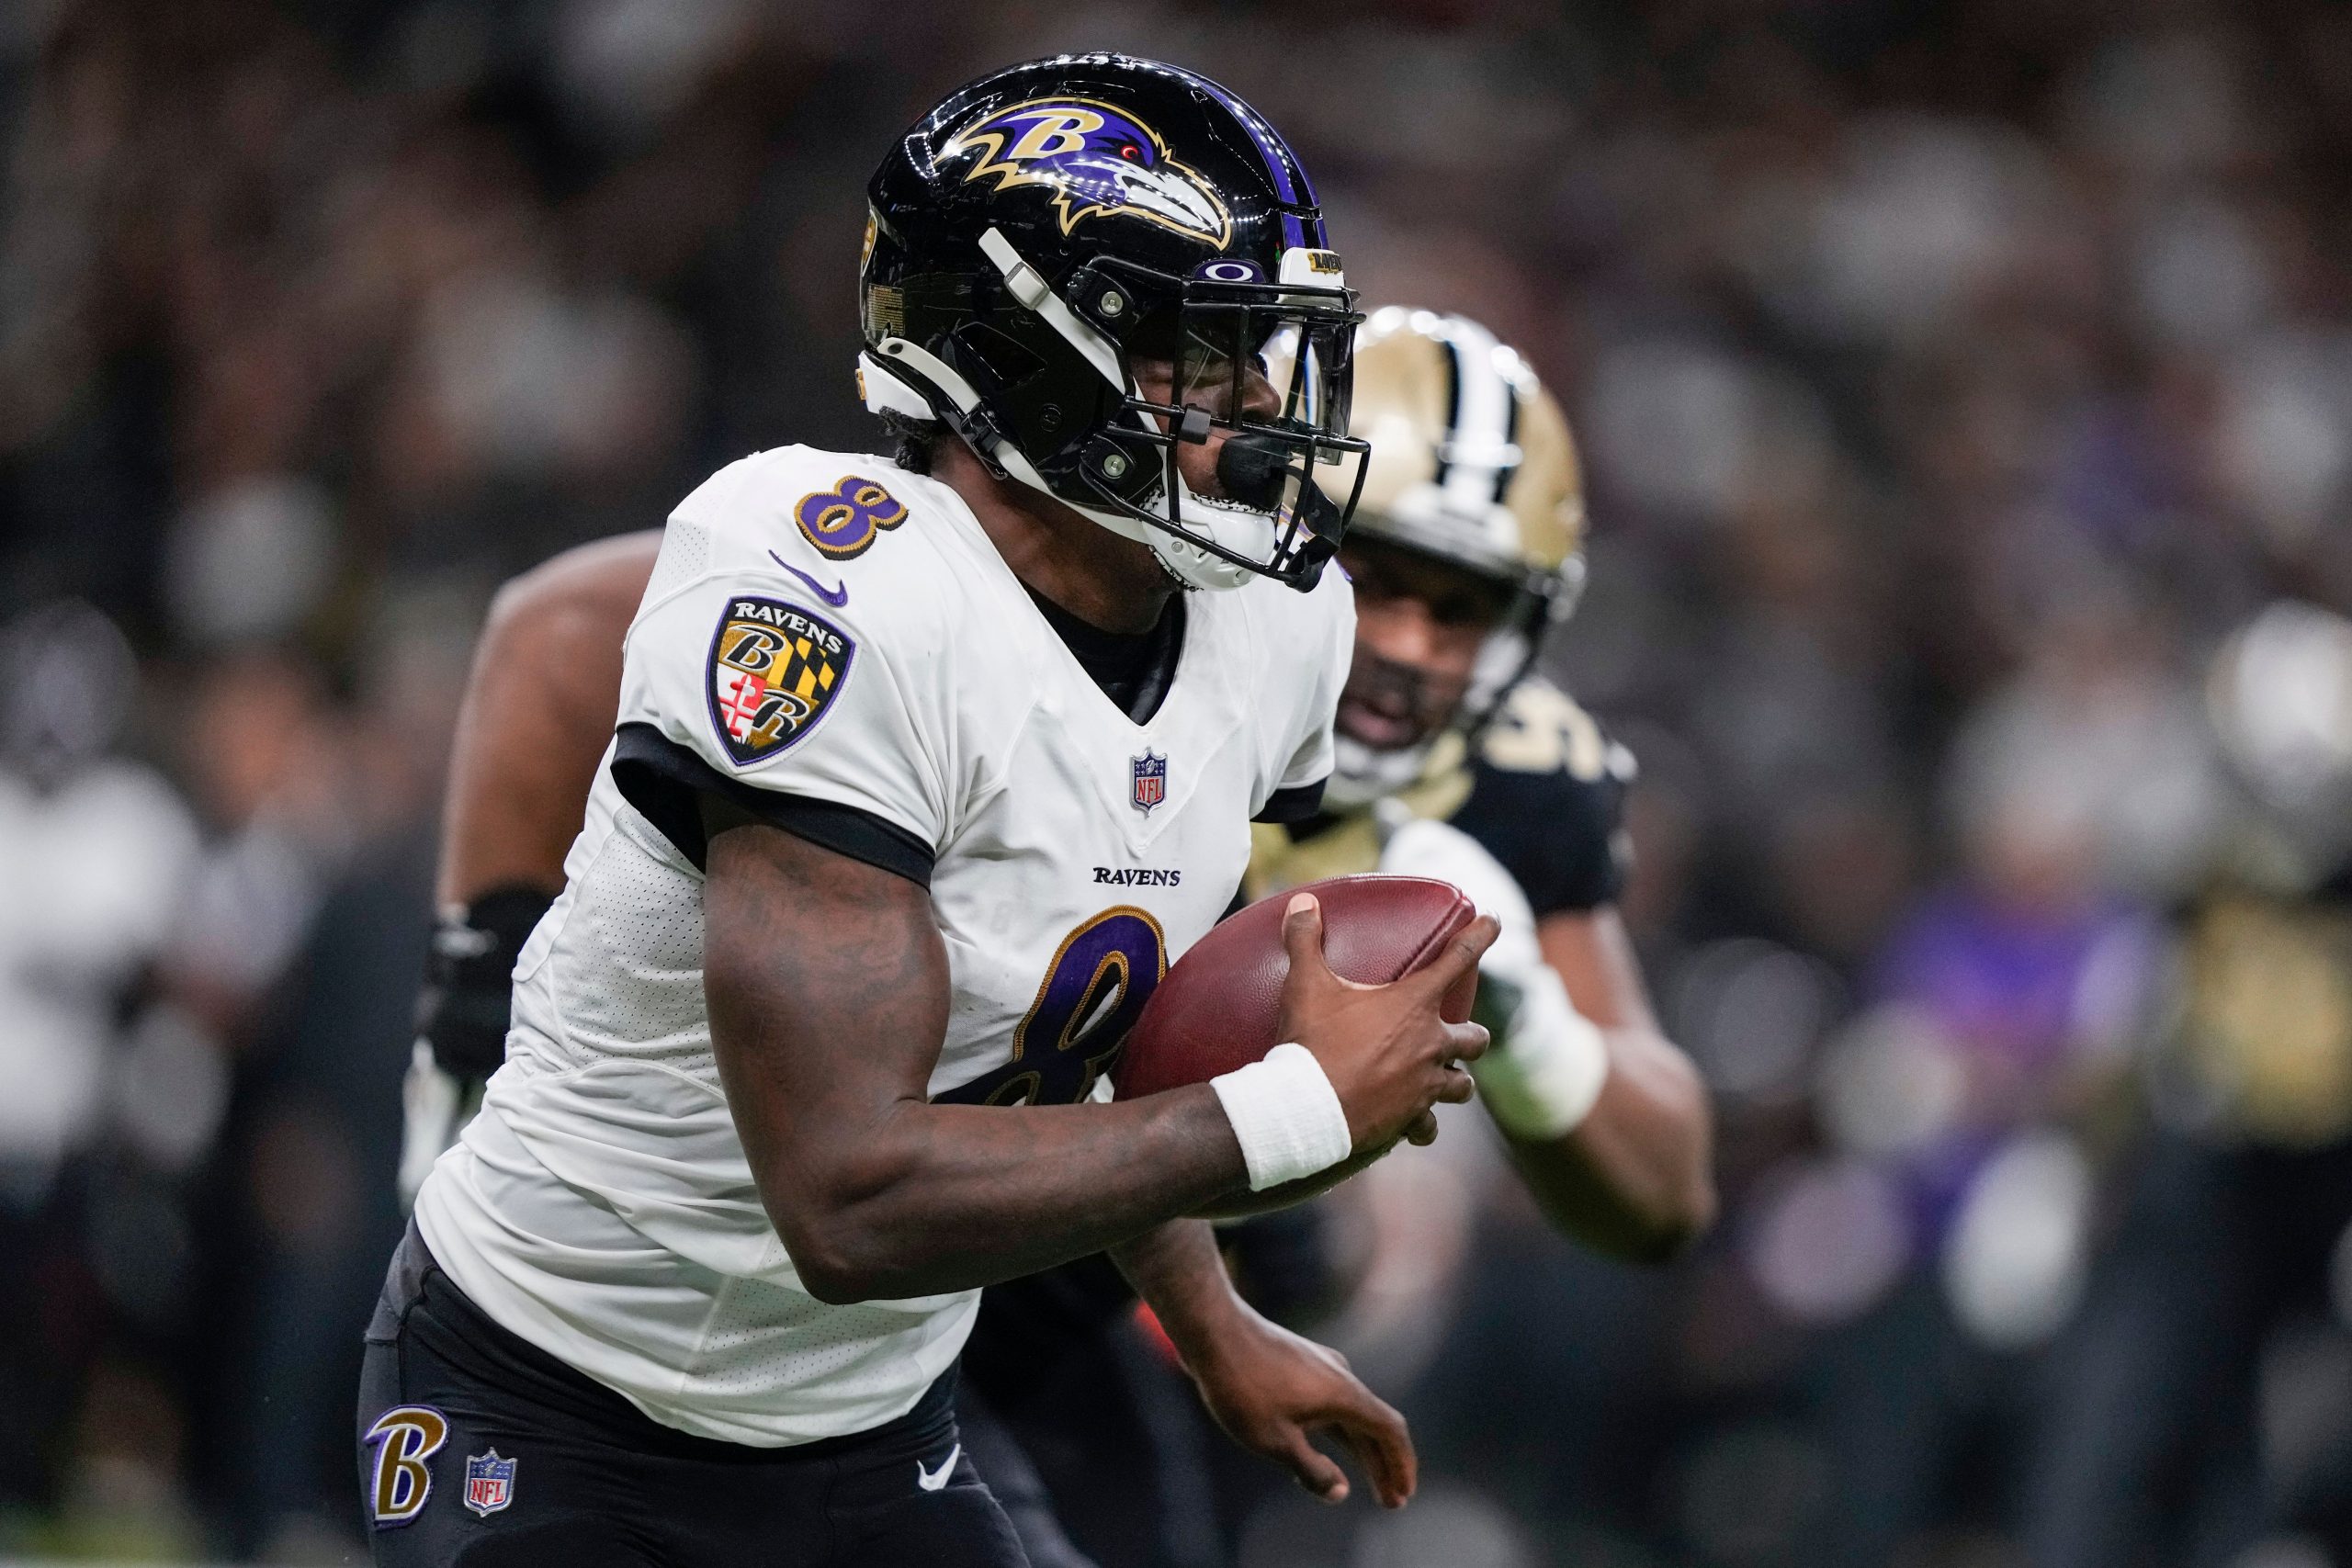 Baltimore Ravens’ Lamar Jackson upset with Ronnie Stanley, two fight in MNF game vs New Orleans Saints: Watch